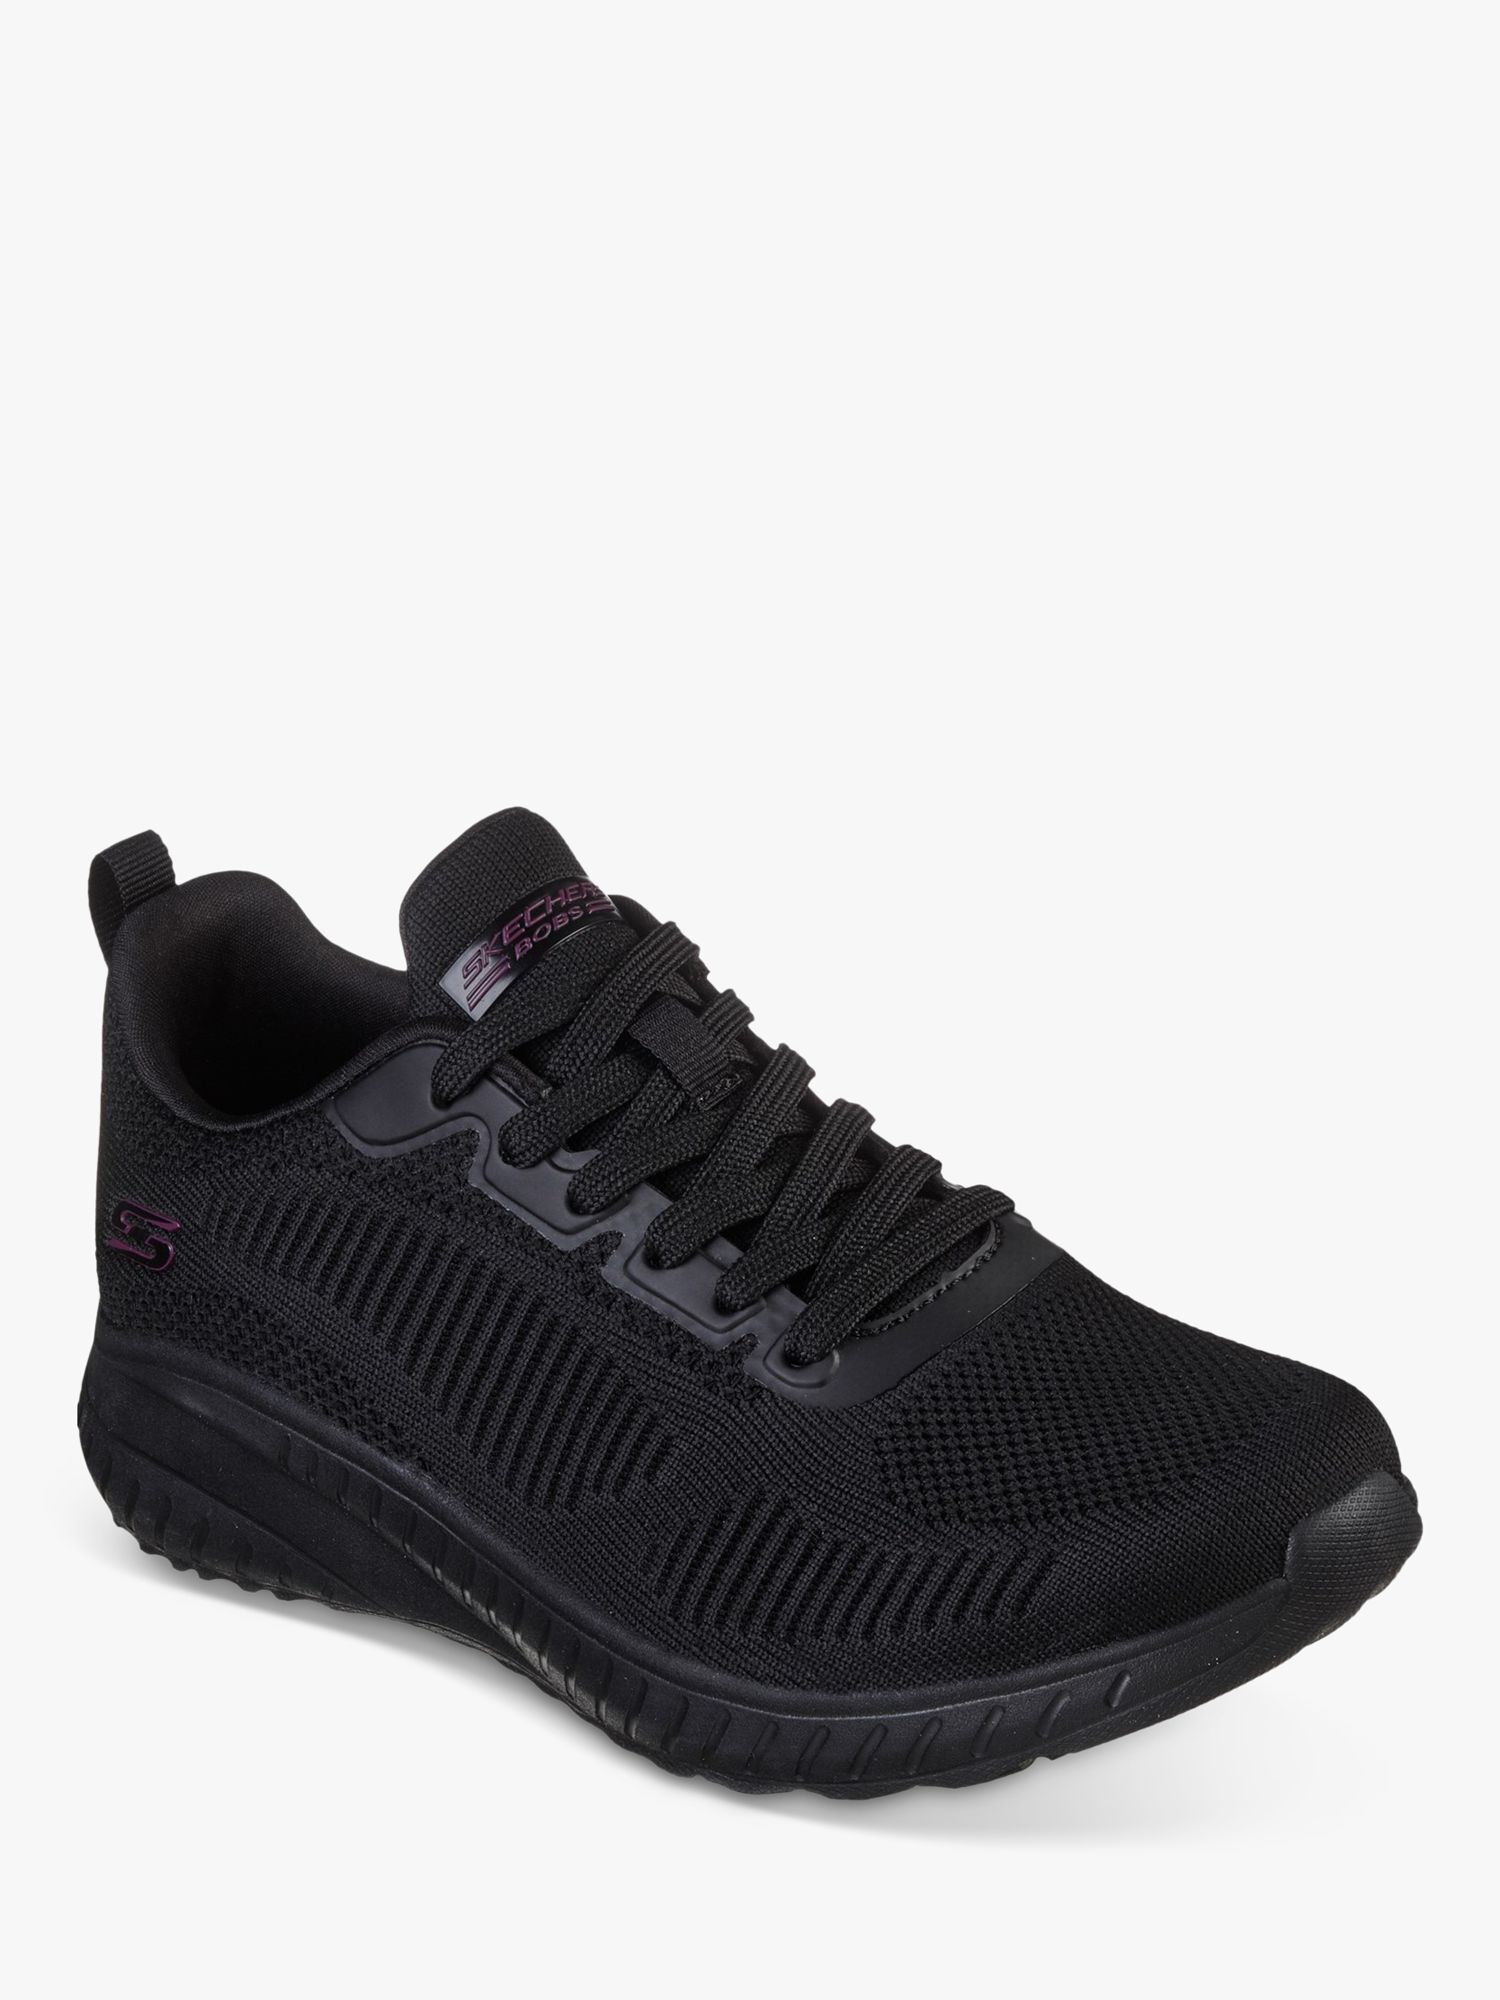 Buy Skechers BOBS Squad Chaos Face Off Trainers Online at johnlewis.com